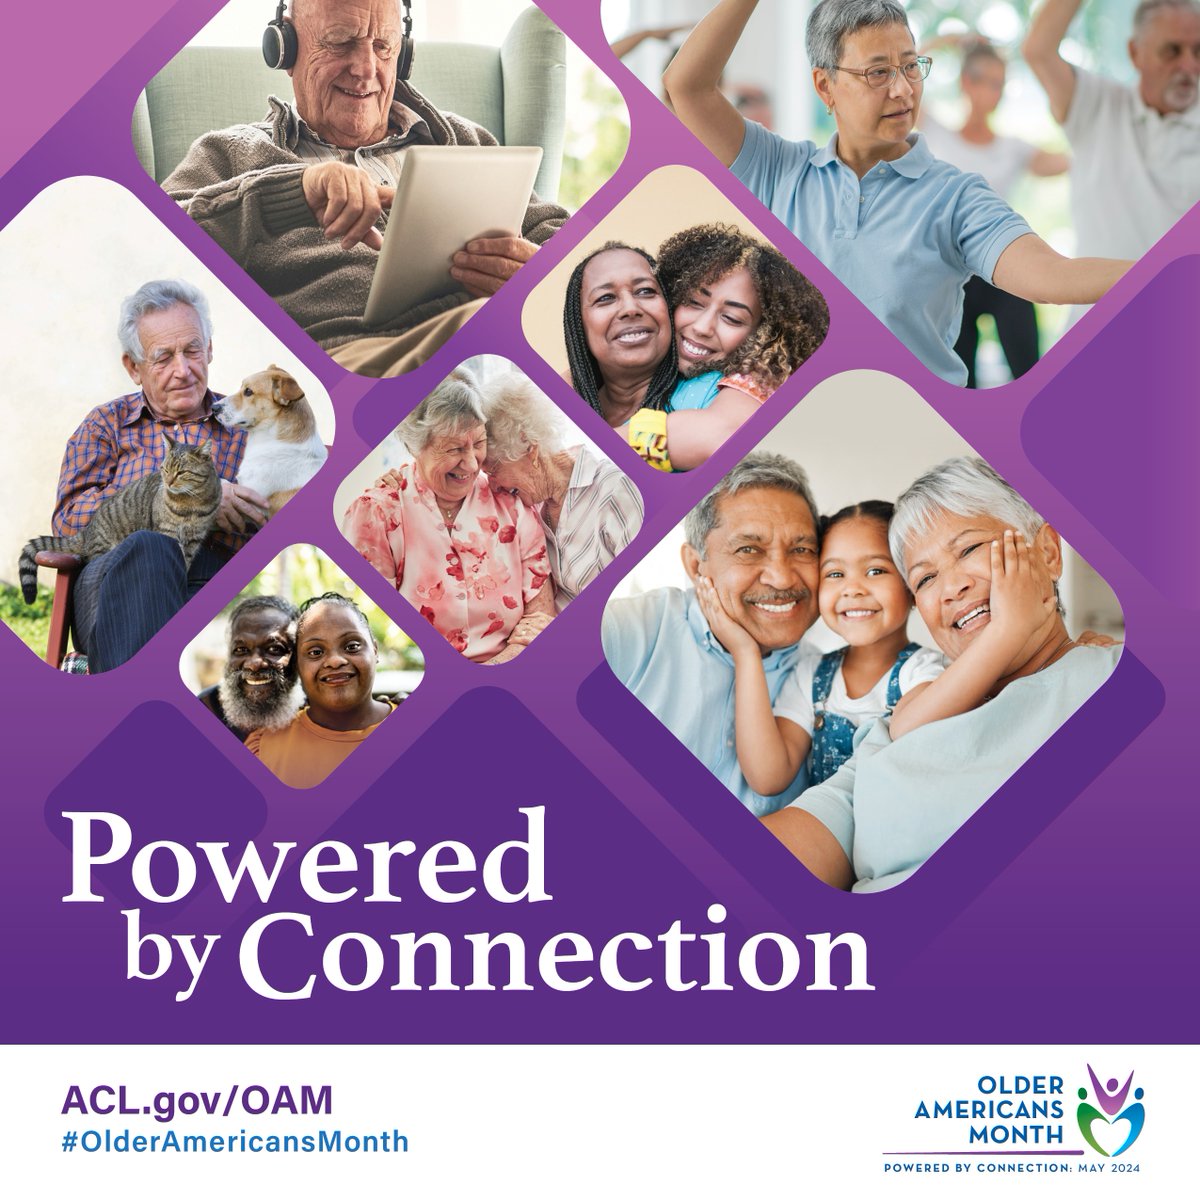 It’s time to celebrate #OlderAmericansMonth. This May, DFSS Senior Services Division is promoting the importance of meaningfully connecting with others. acl.gov/oam #PoweredByConnection